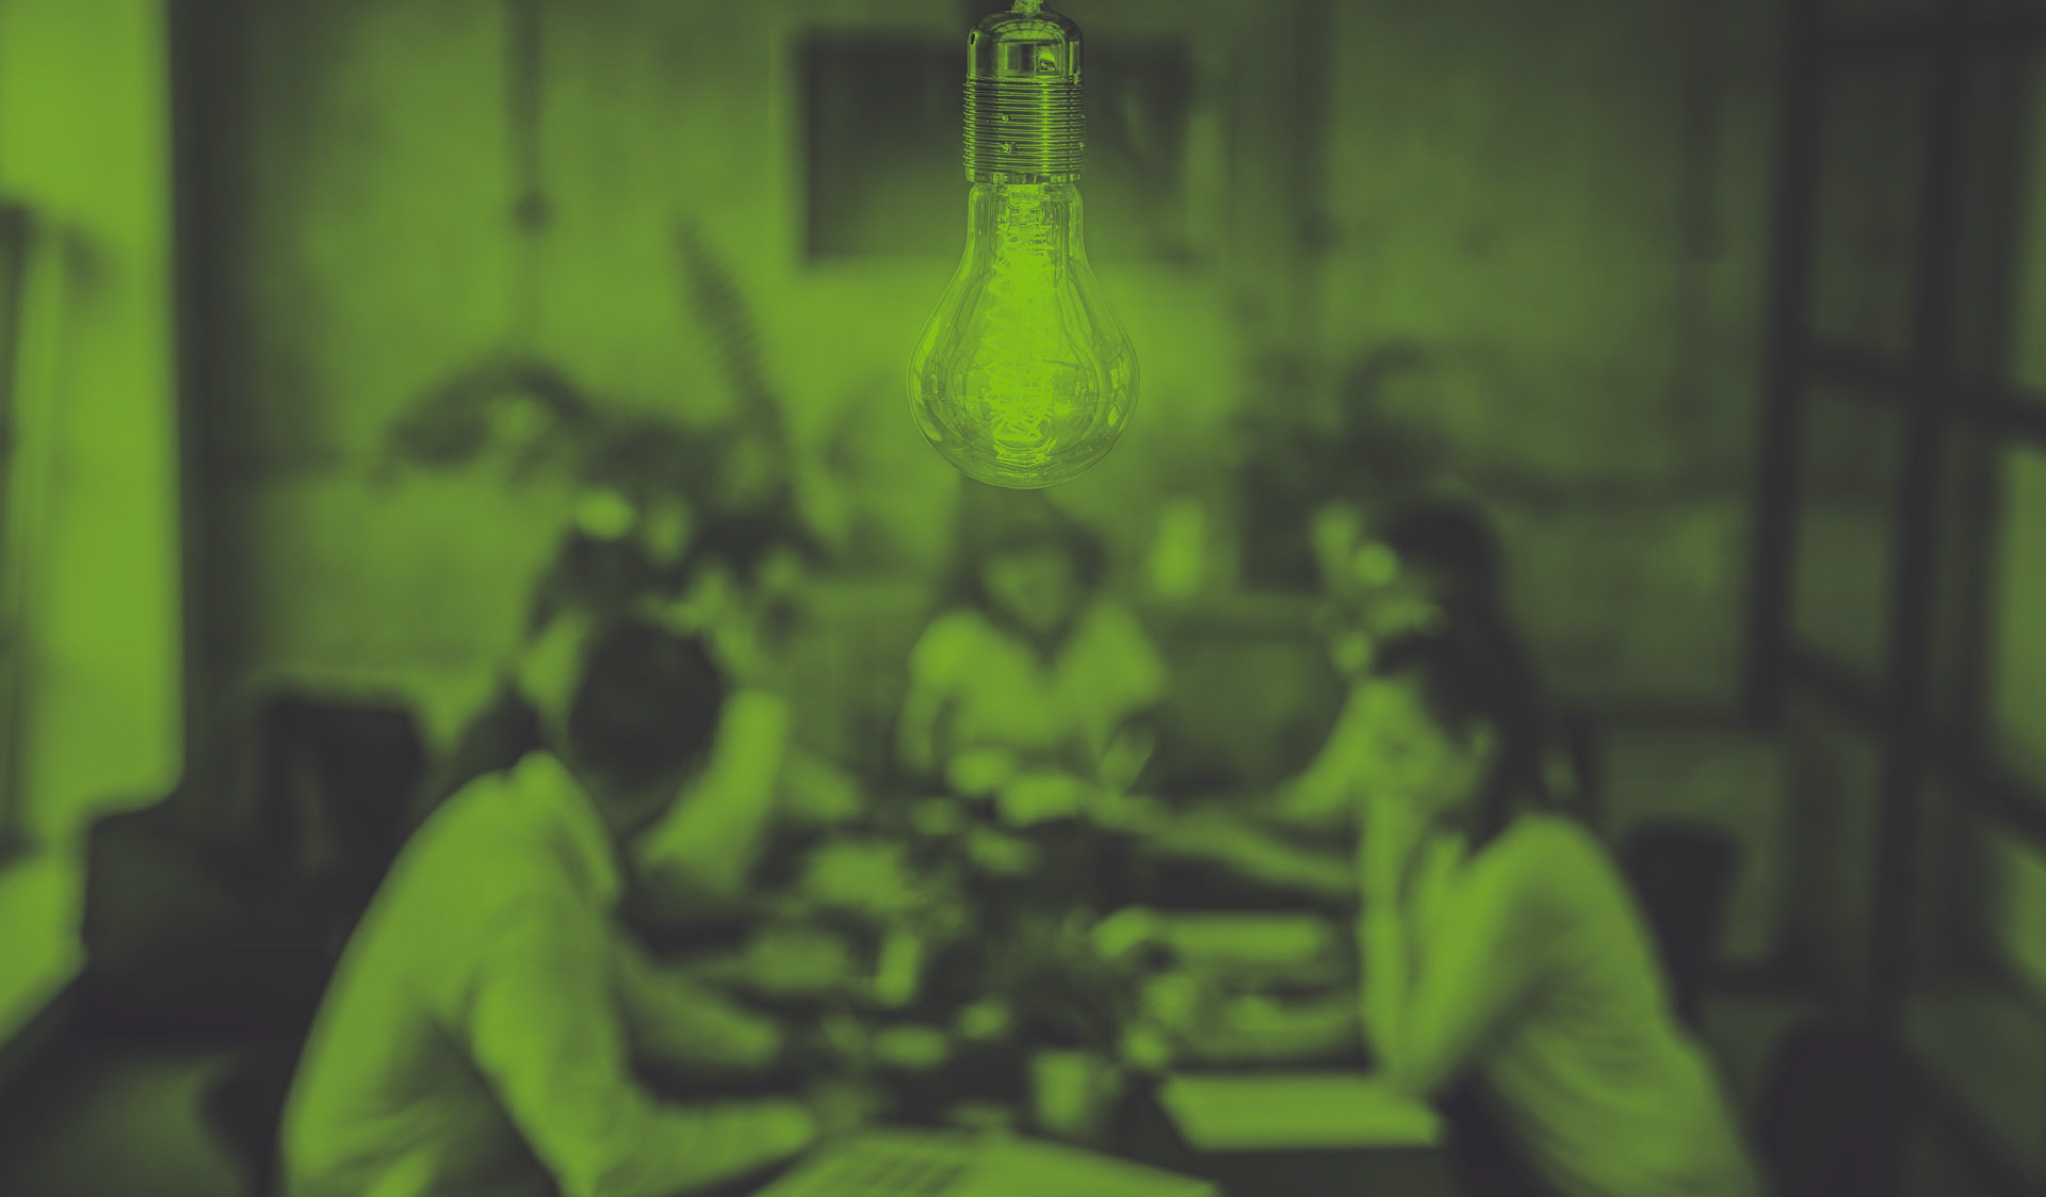 photo of lightbulb in foreground with team at a table in the background